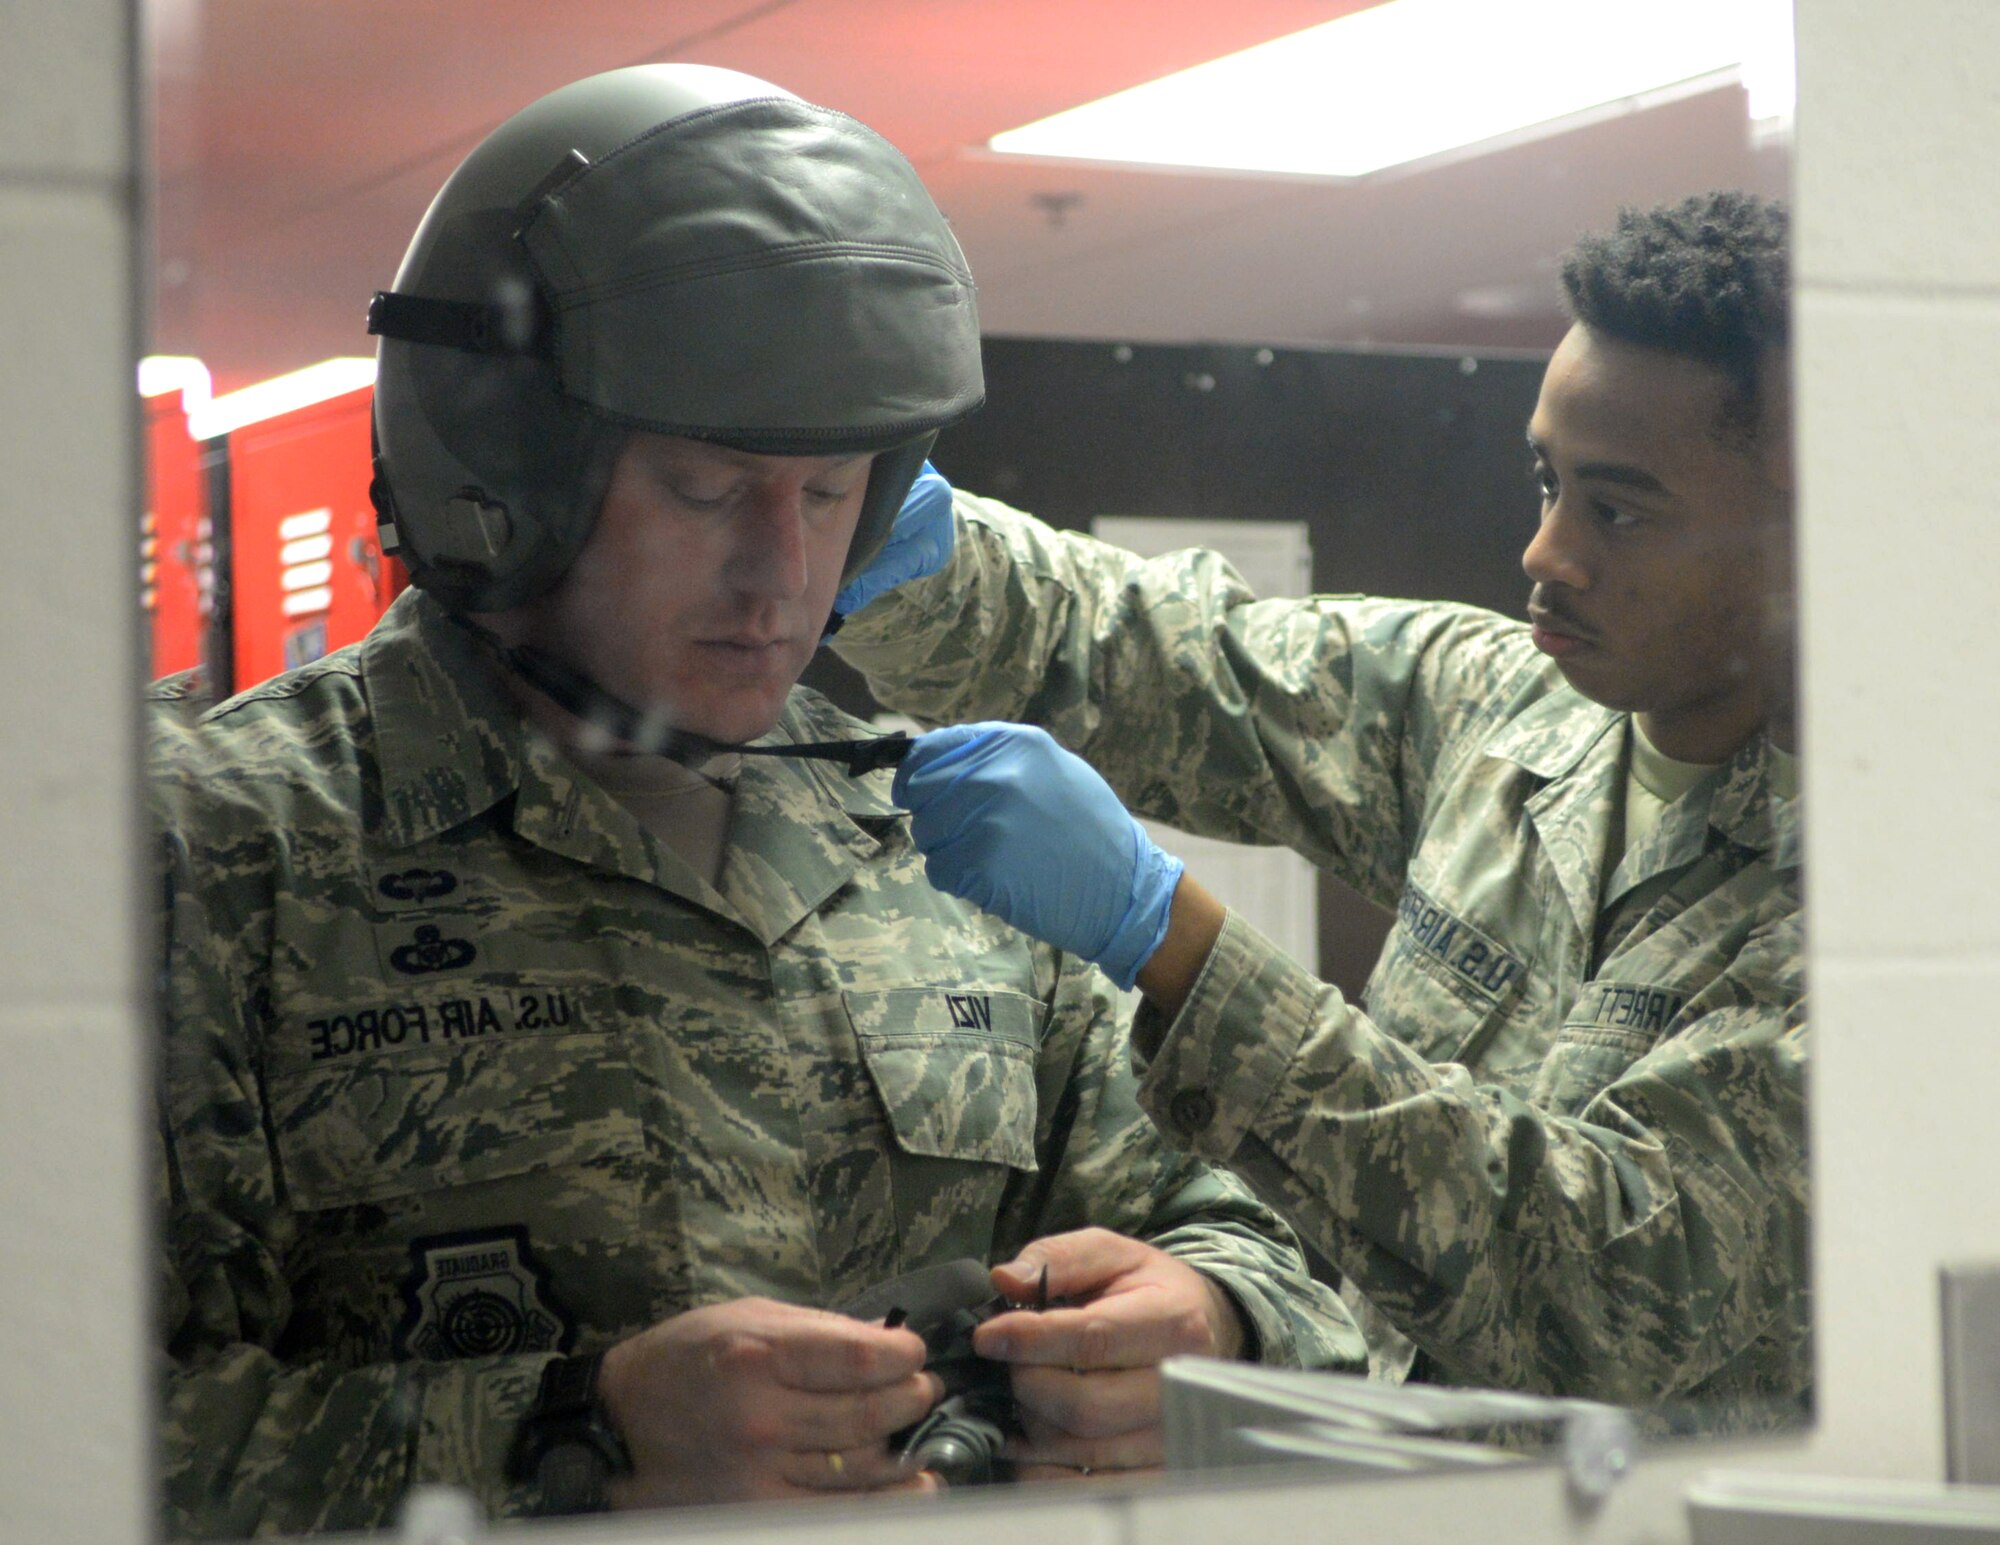 Airman 1st Class Trevor Garrett, a 28th Operations Support Squadron aircrew flight equipment technician, right, fits a helmet for Chief Master Sgt. Adam Vizi, the 28th Bomb Wing command chief, at Ellsworth Air Force Base, S.D., March 14, 2017. AFE technicians are tasked with performing thorough inspections on equipment such as aircrew helmets, oxygen masks and harnesses, as well as making any necessary repairs. (U.S. Air Force photo by Senior Airman Denise Jenson)